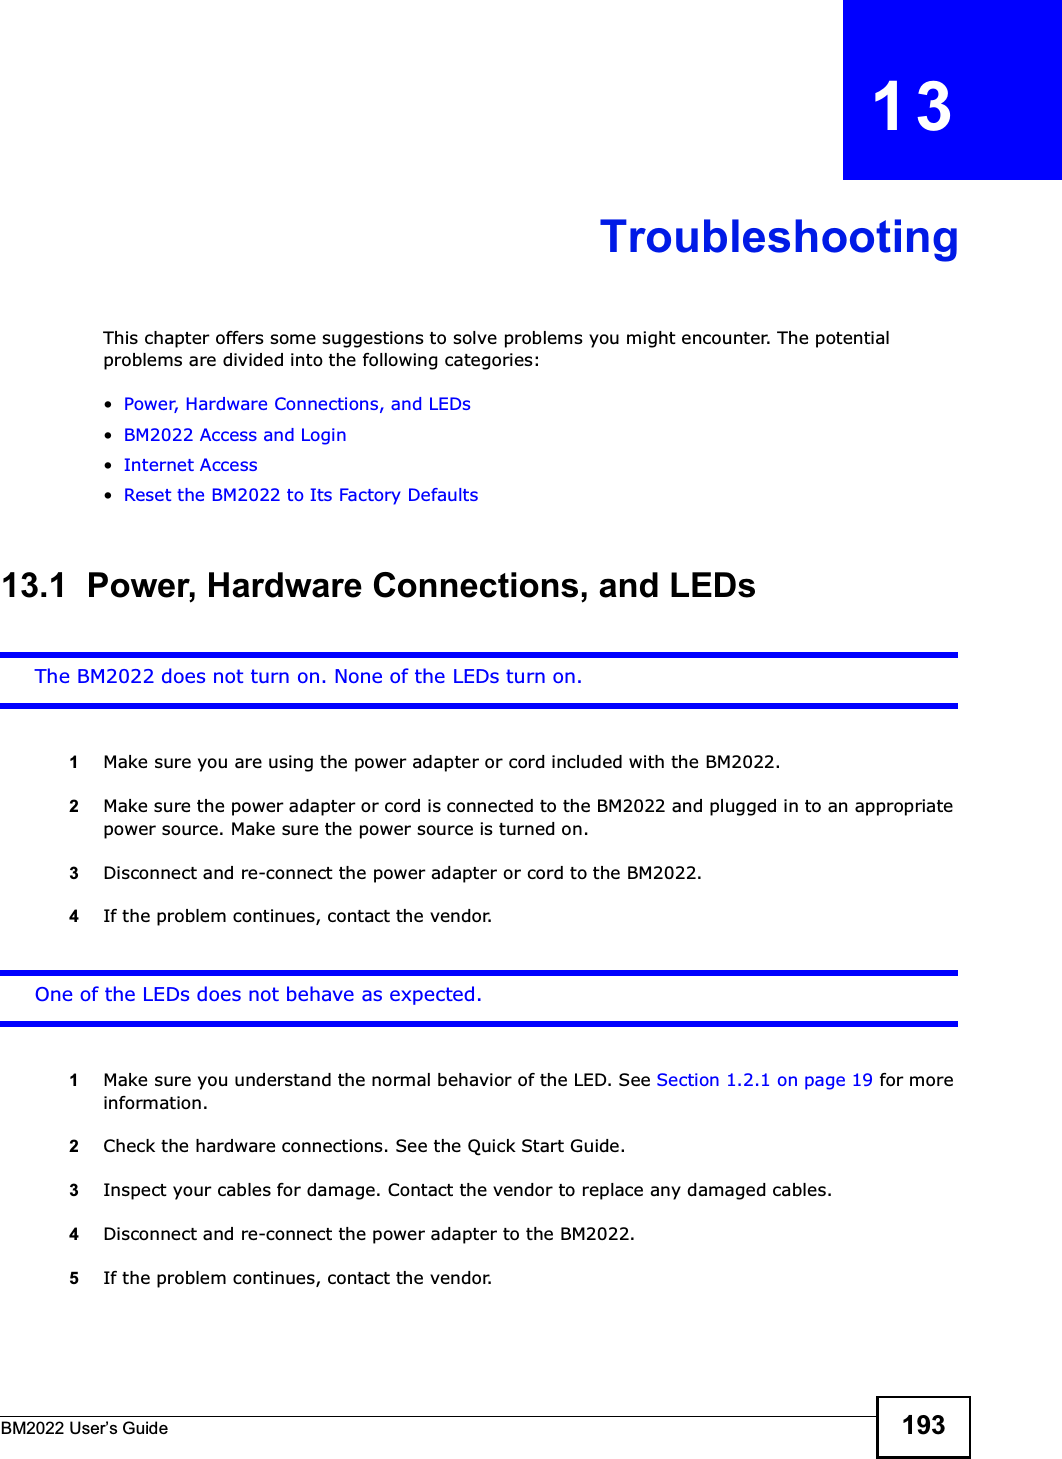 BM2022 Users Guide 193CHAPTER   13TroubleshootingThis chapter offers some suggestions to solve problems you might encounter. The potential problems are divided into the following categories:Power, Hardware Connections, and LEDsBM2022 Access and LoginInternet AccessReset the BM2022 to Its Factory Defaults13.1  Power, Hardware Connections, and LEDsThe BM2022 does not turn on. None of the LEDs turn on.1Make sure you are using the power adapter or cord included with the BM2022.2Make sure the power adapter or cord is connected to the BM2022 and plugged in to an appropriate power source. Make sure the power source is turned on.3Disconnect and re-connect the power adapter or cord to the BM2022.4If the problem continues, contact the vendor.One of the LEDs does not behave as expected.1Make sure you understand the normal behavior of the LED. See Section 1.2.1 on page 19 for more information.2Check the hardware connections. See the Quick Start Guide.3Inspect your cables for damage. Contact the vendor to replace any damaged cables.4Disconnect and re-connect the power adapter to the BM2022.5If the problem continues, contact the vendor.